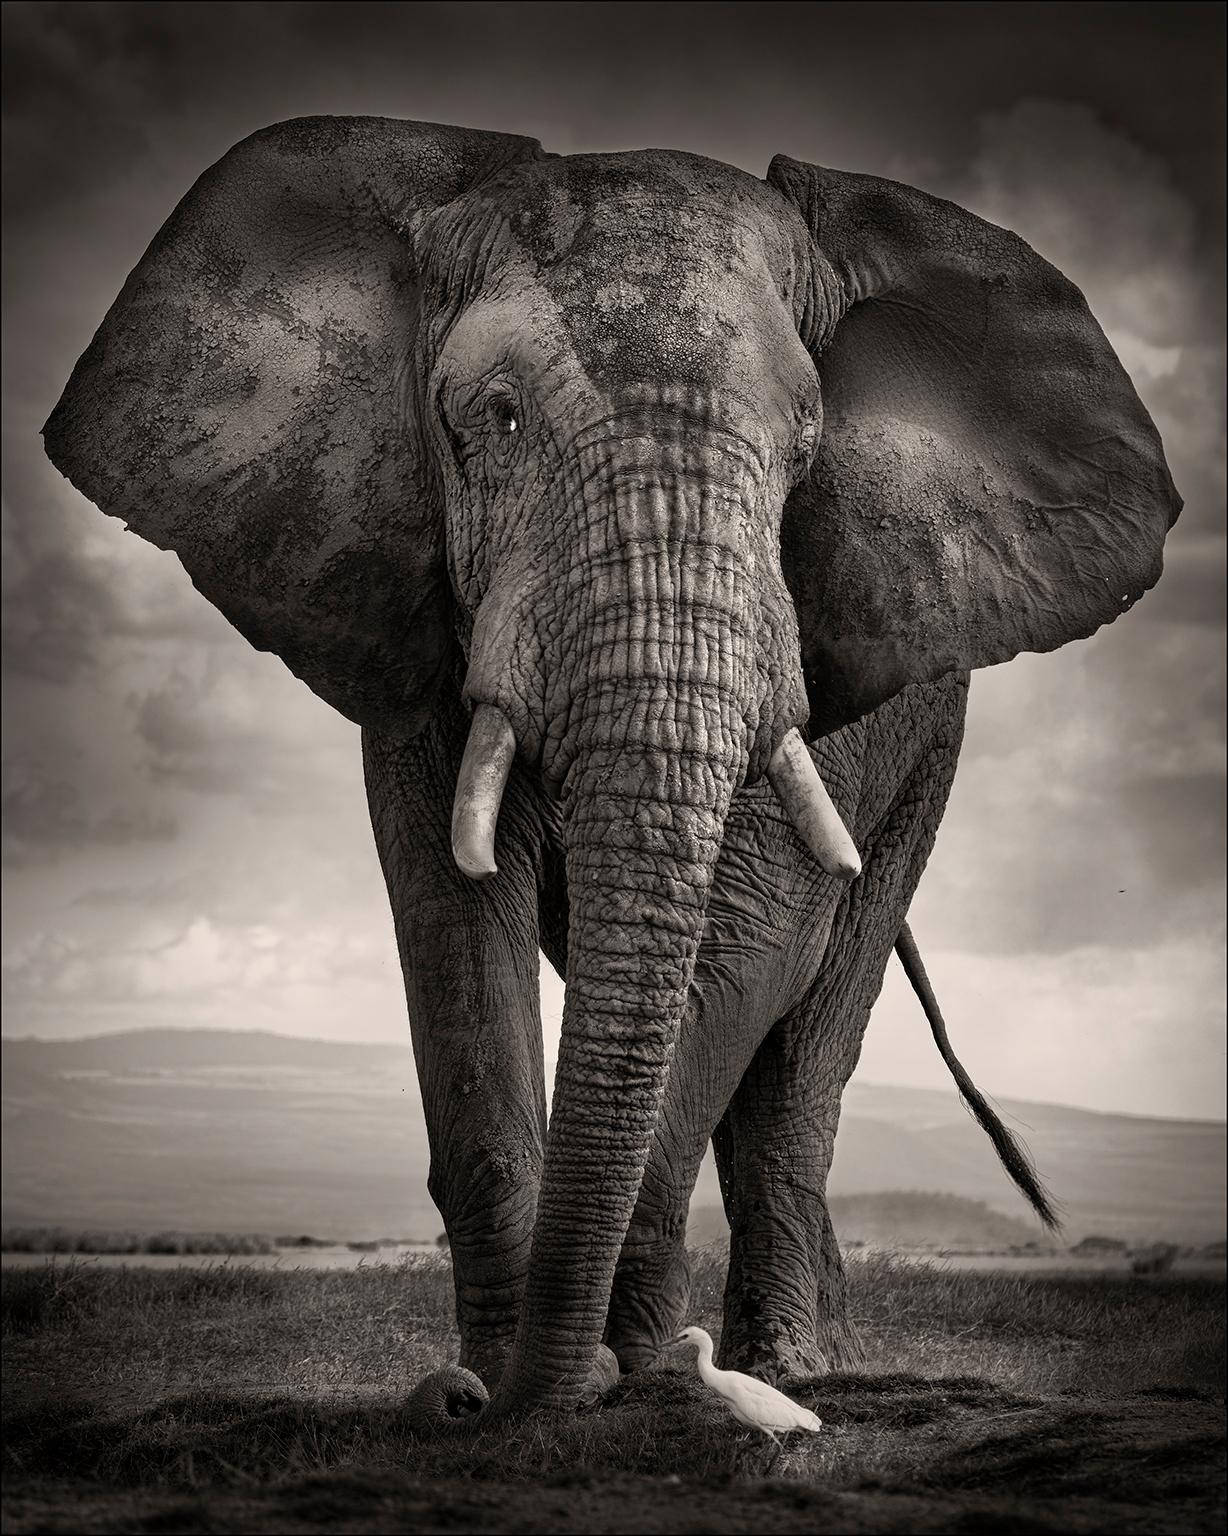 Joachim Schmeisser Portrait Photograph - The bull and the bird III, Elephant, animal, Africa, black and white photography